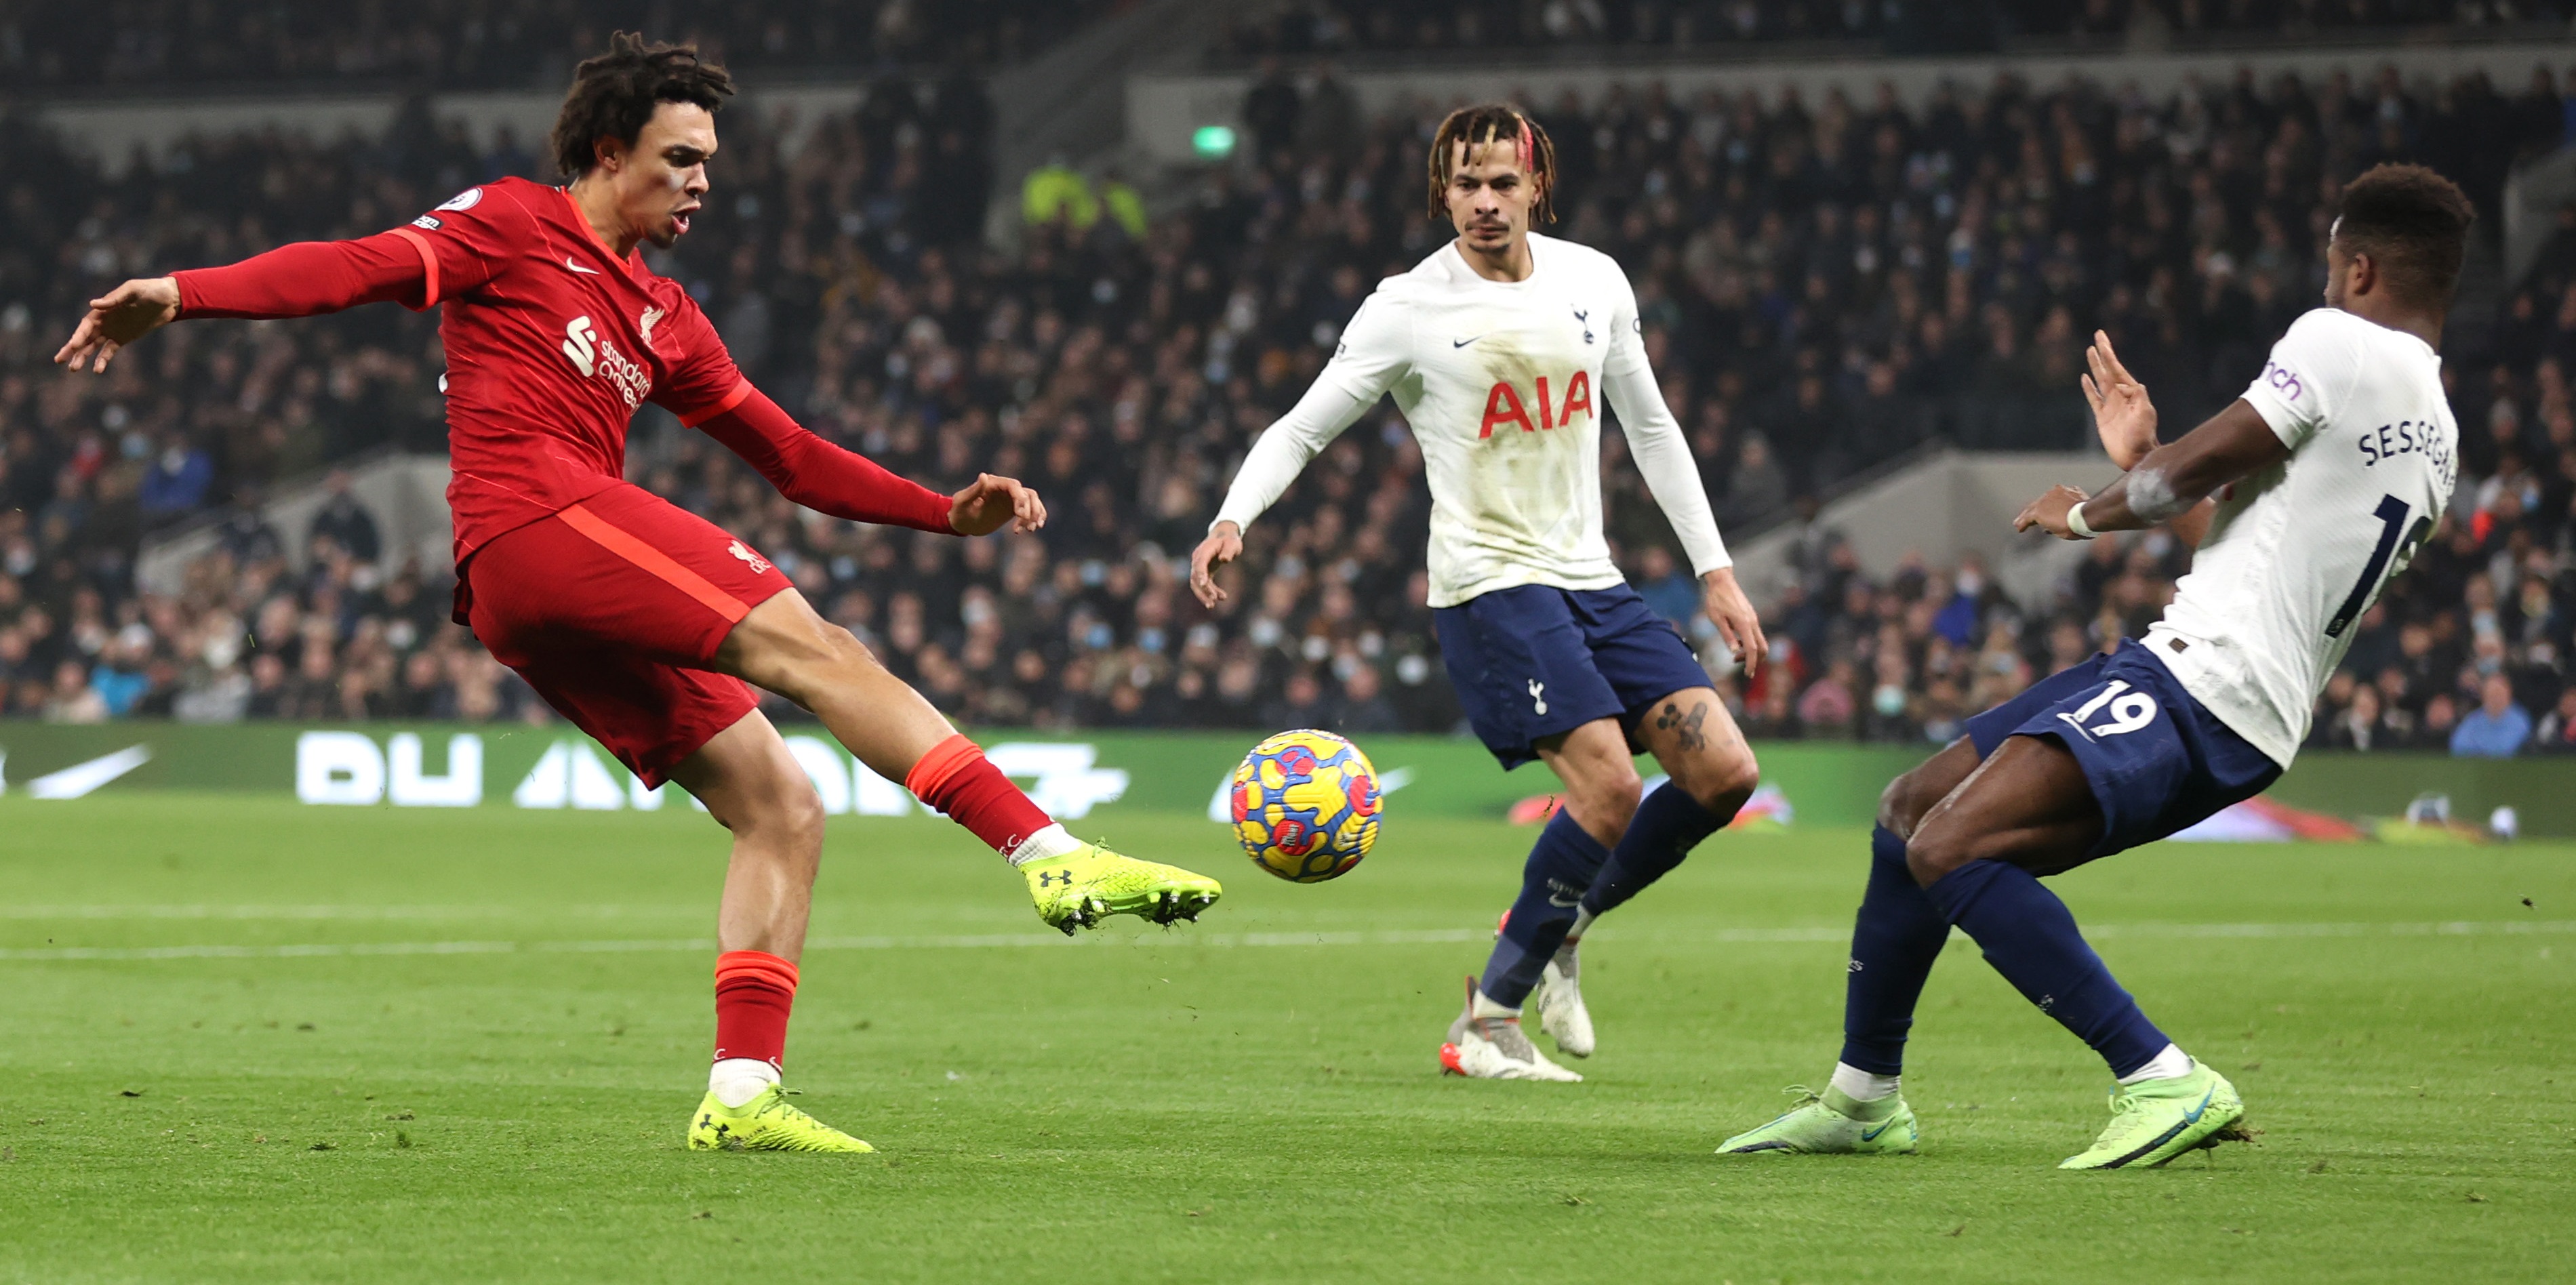 BBC pundit weighs in on ‘astonishing’ moment in Spurs v Liverpool that had nothing to do with the goals or officiating